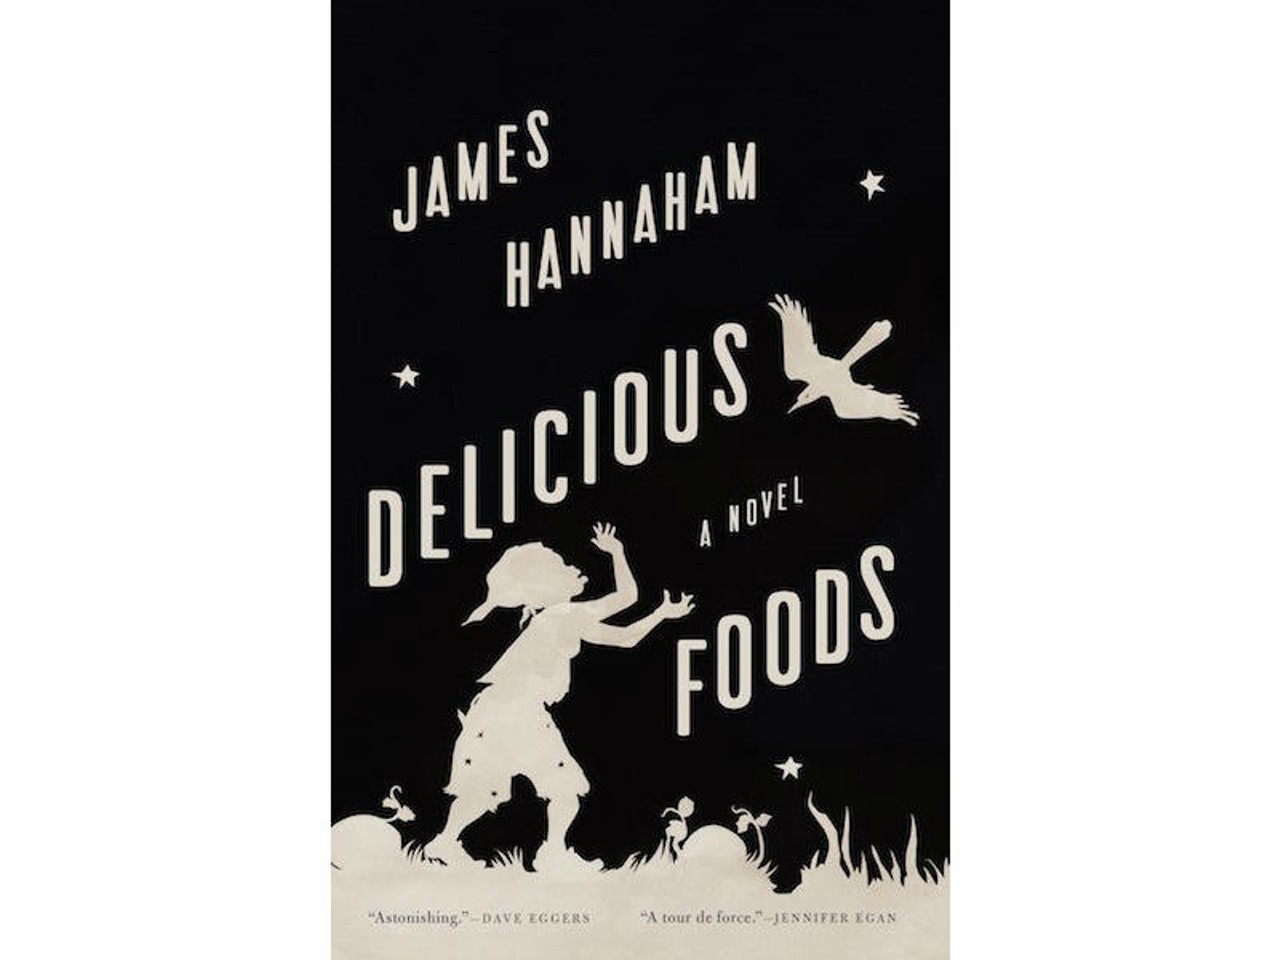 Delicious Foods, a novel by James Hannaham (Little, Brown & Co., 384 pages)
The devastating story of a woman who loses her husband to racist violence, and of her son, who loses his mother to crack addiction. Each chapter shifts perspective &#150; following its players&#146; inner thoughts and motivations in rich and sympathetic details &#150; between the mother, the son and crack cocaine. That&#146;s right: One of the narrators of the book is crack. &#151;RR